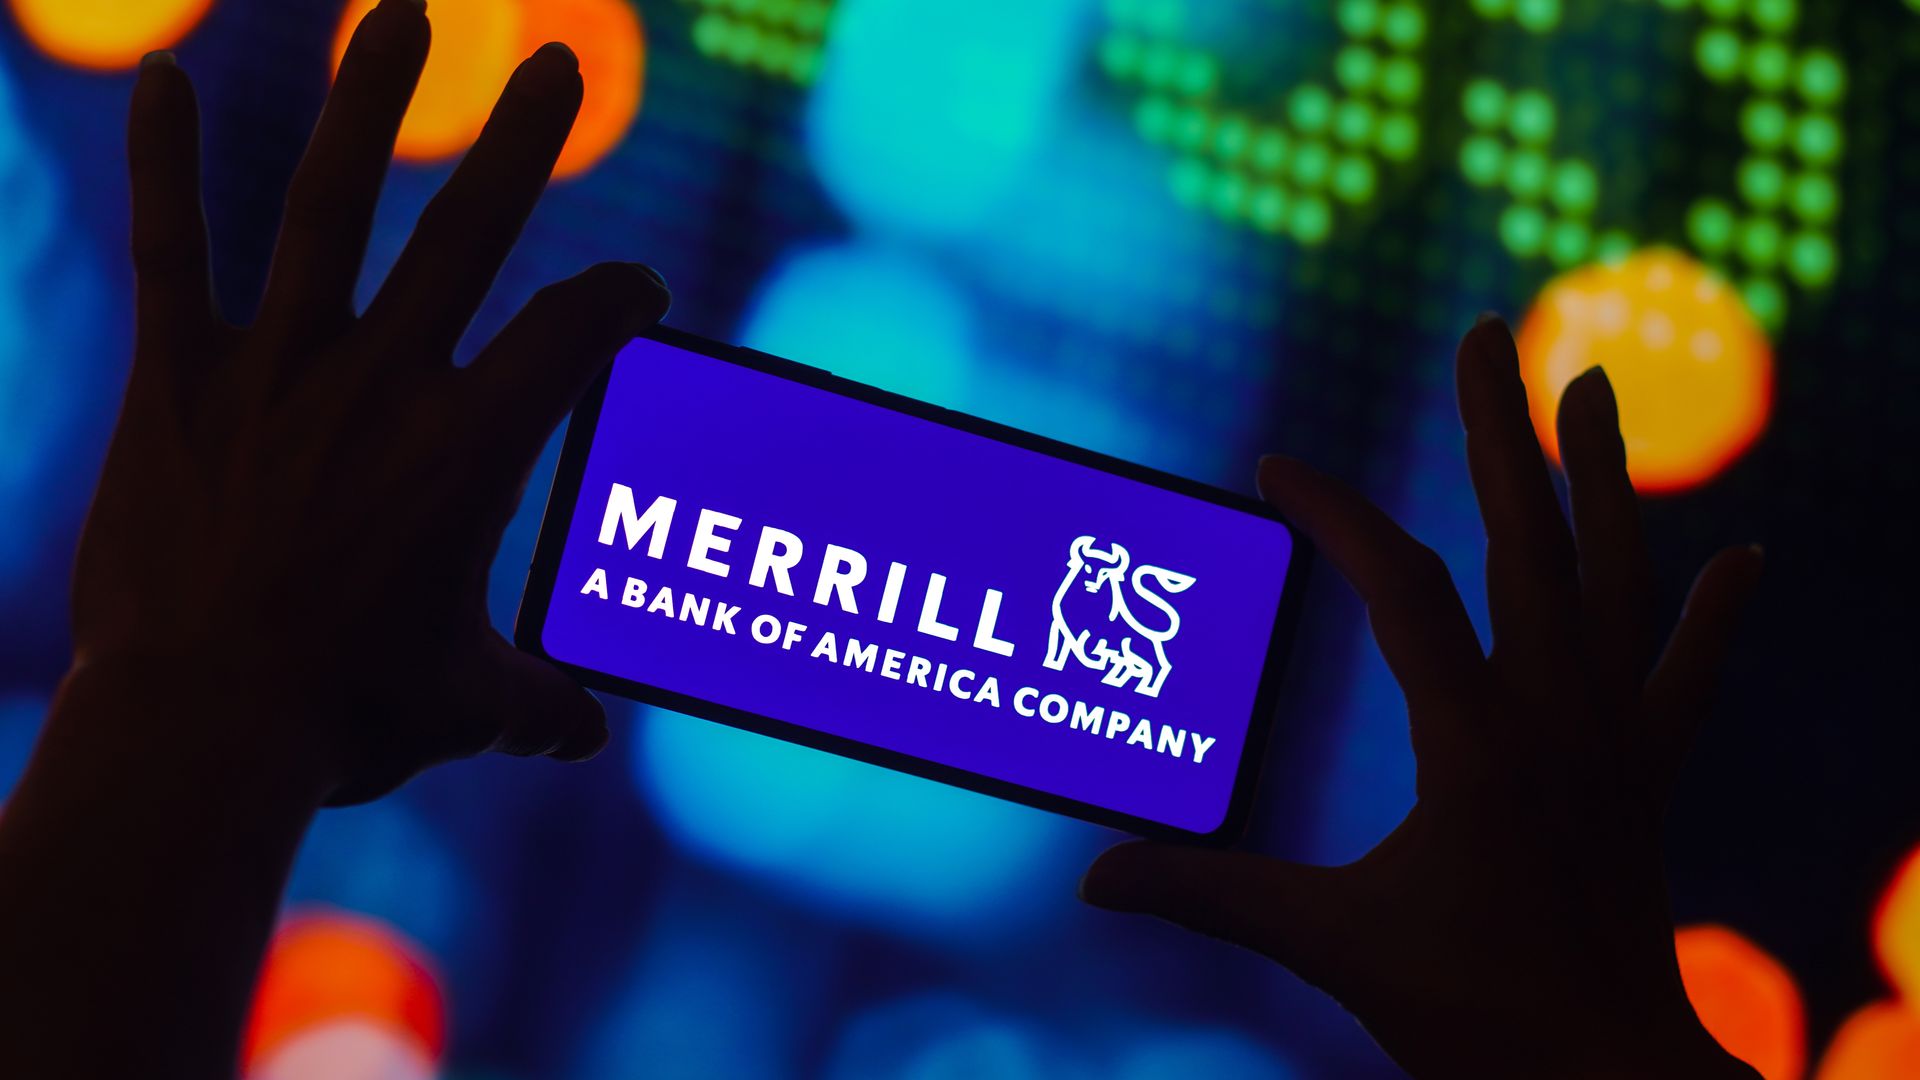 A phone displaying the Merrill logo